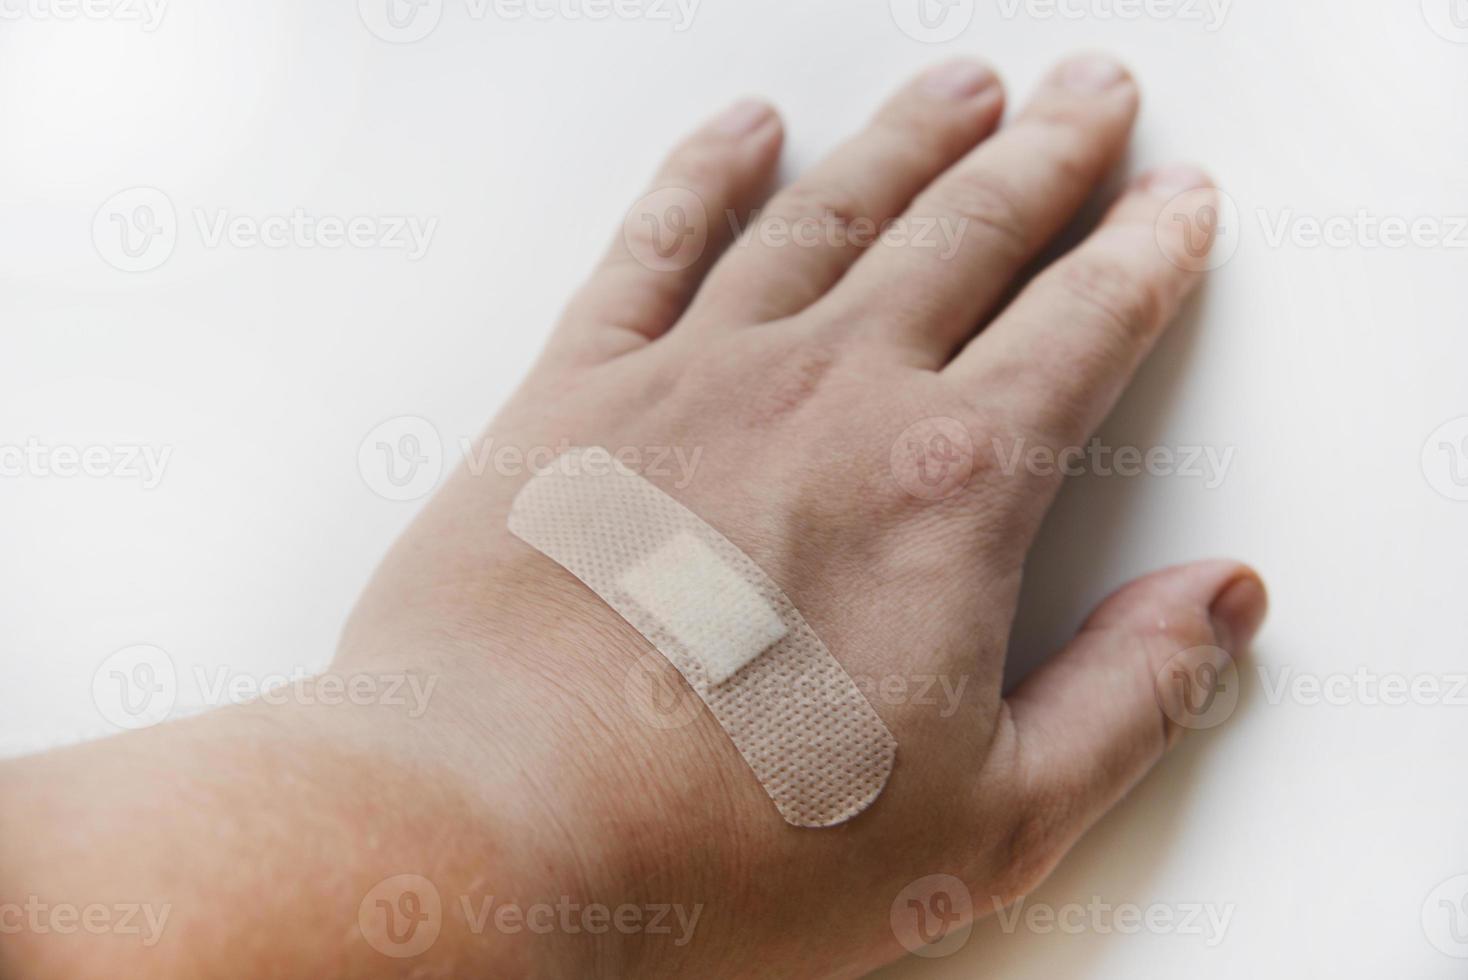 A medical patch on a man's arm on a white background. A yellow patch on the  wound on his arm. 14196981 Stock Photo at Vecteezy